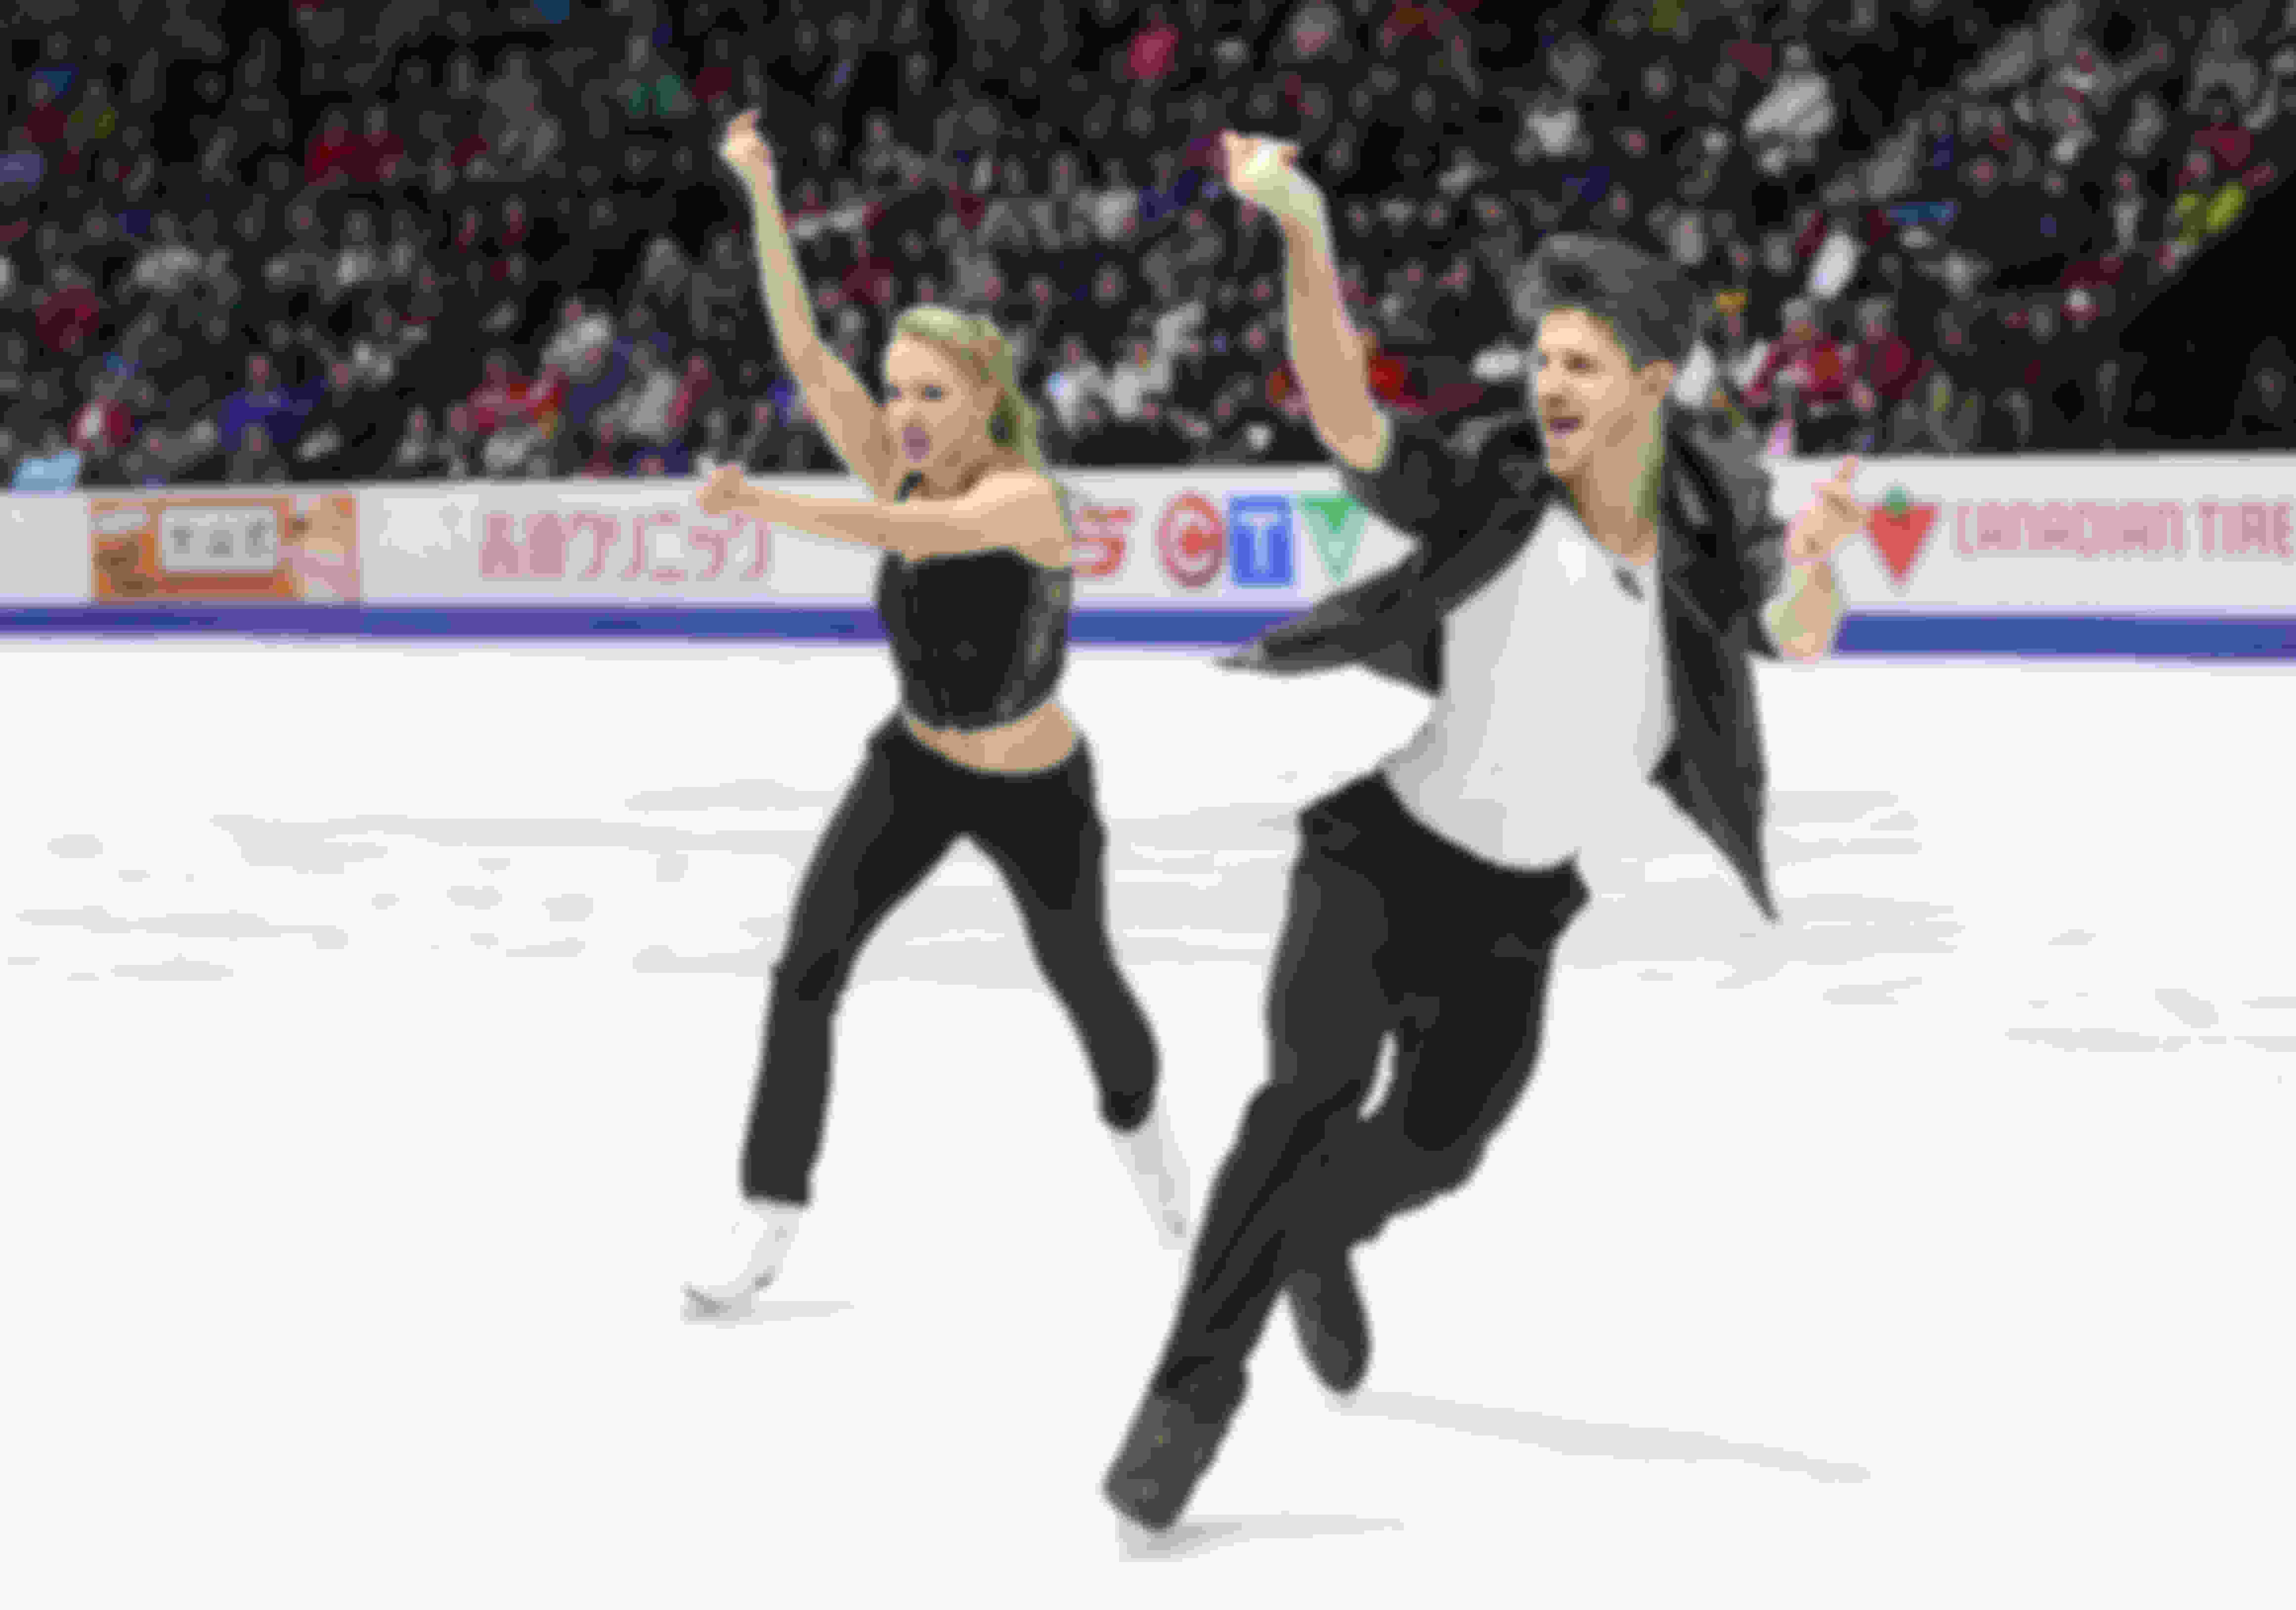 Before the 2021/22 season ladies in Ice dancing were allowed to wear trousers only in the rhythmic dance. In that photo Alexandra Stepanova of Russia and Ivan Bukin compete at the 2016 Skate Canada